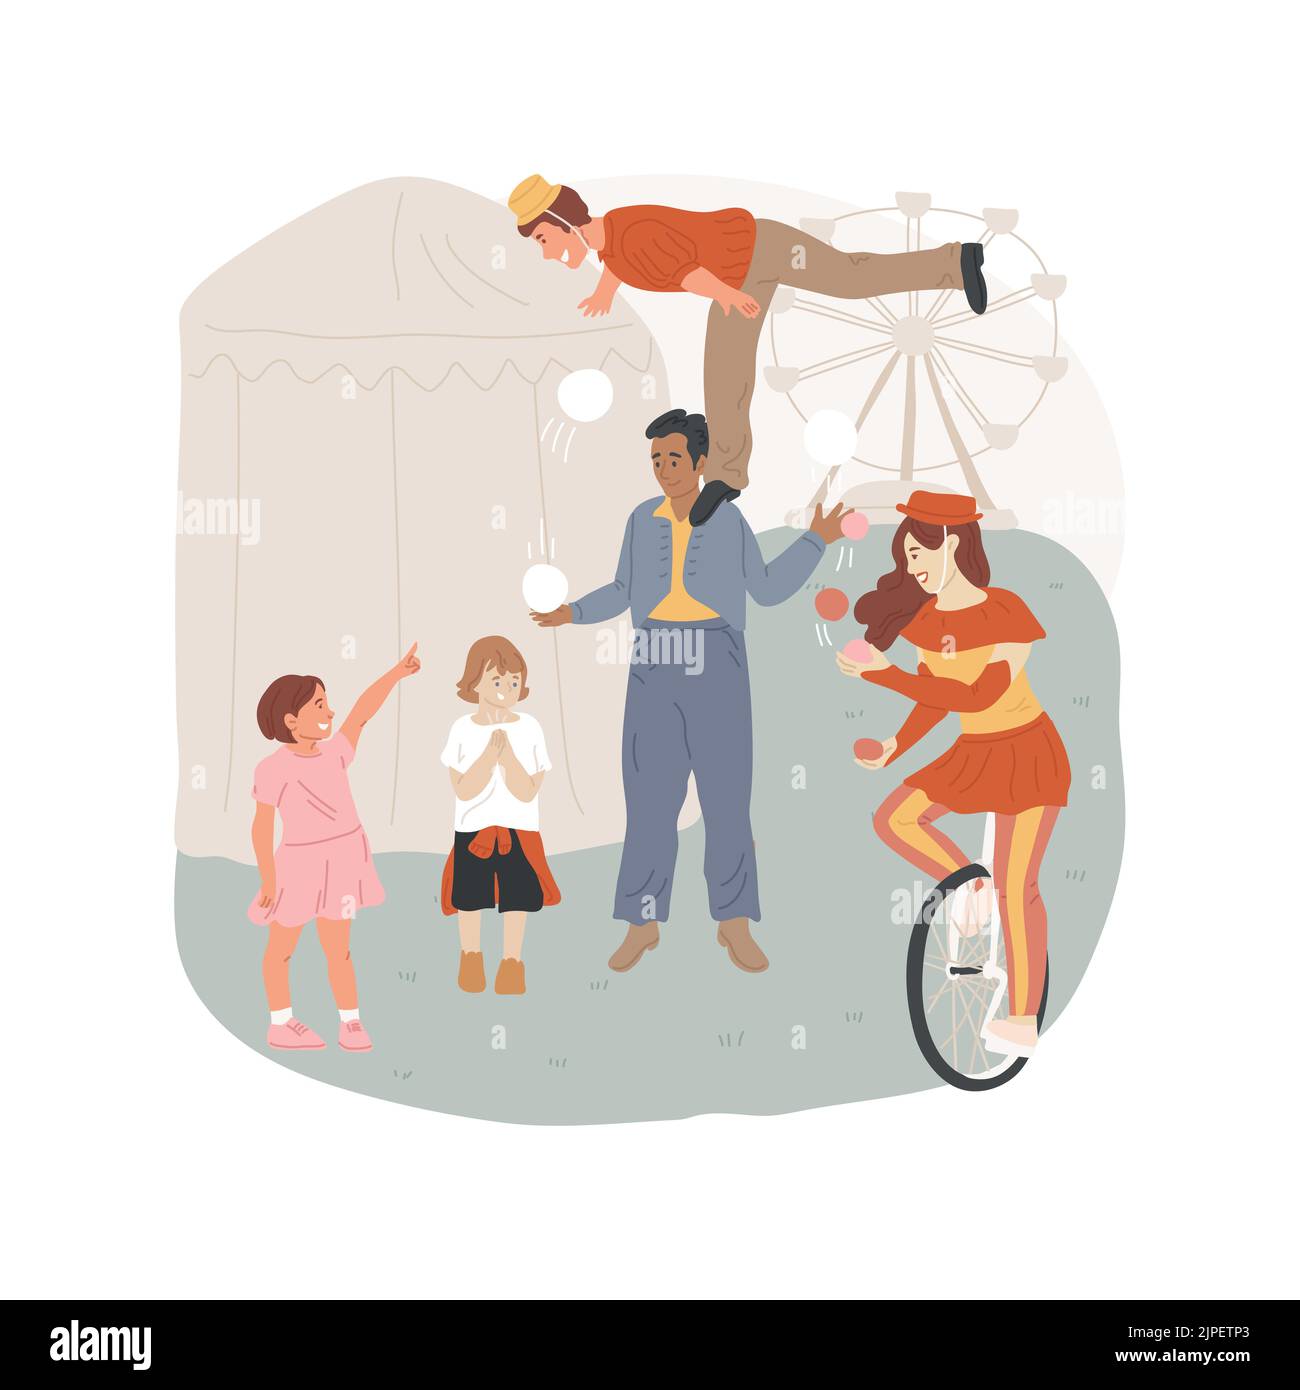 Acrobat performance isolated cartoon vector illustration. Amusement park performance, girl in costume riding unicycle, man stands on other man shoulders, acrobat show for kids vector cartoon. Stock Vector